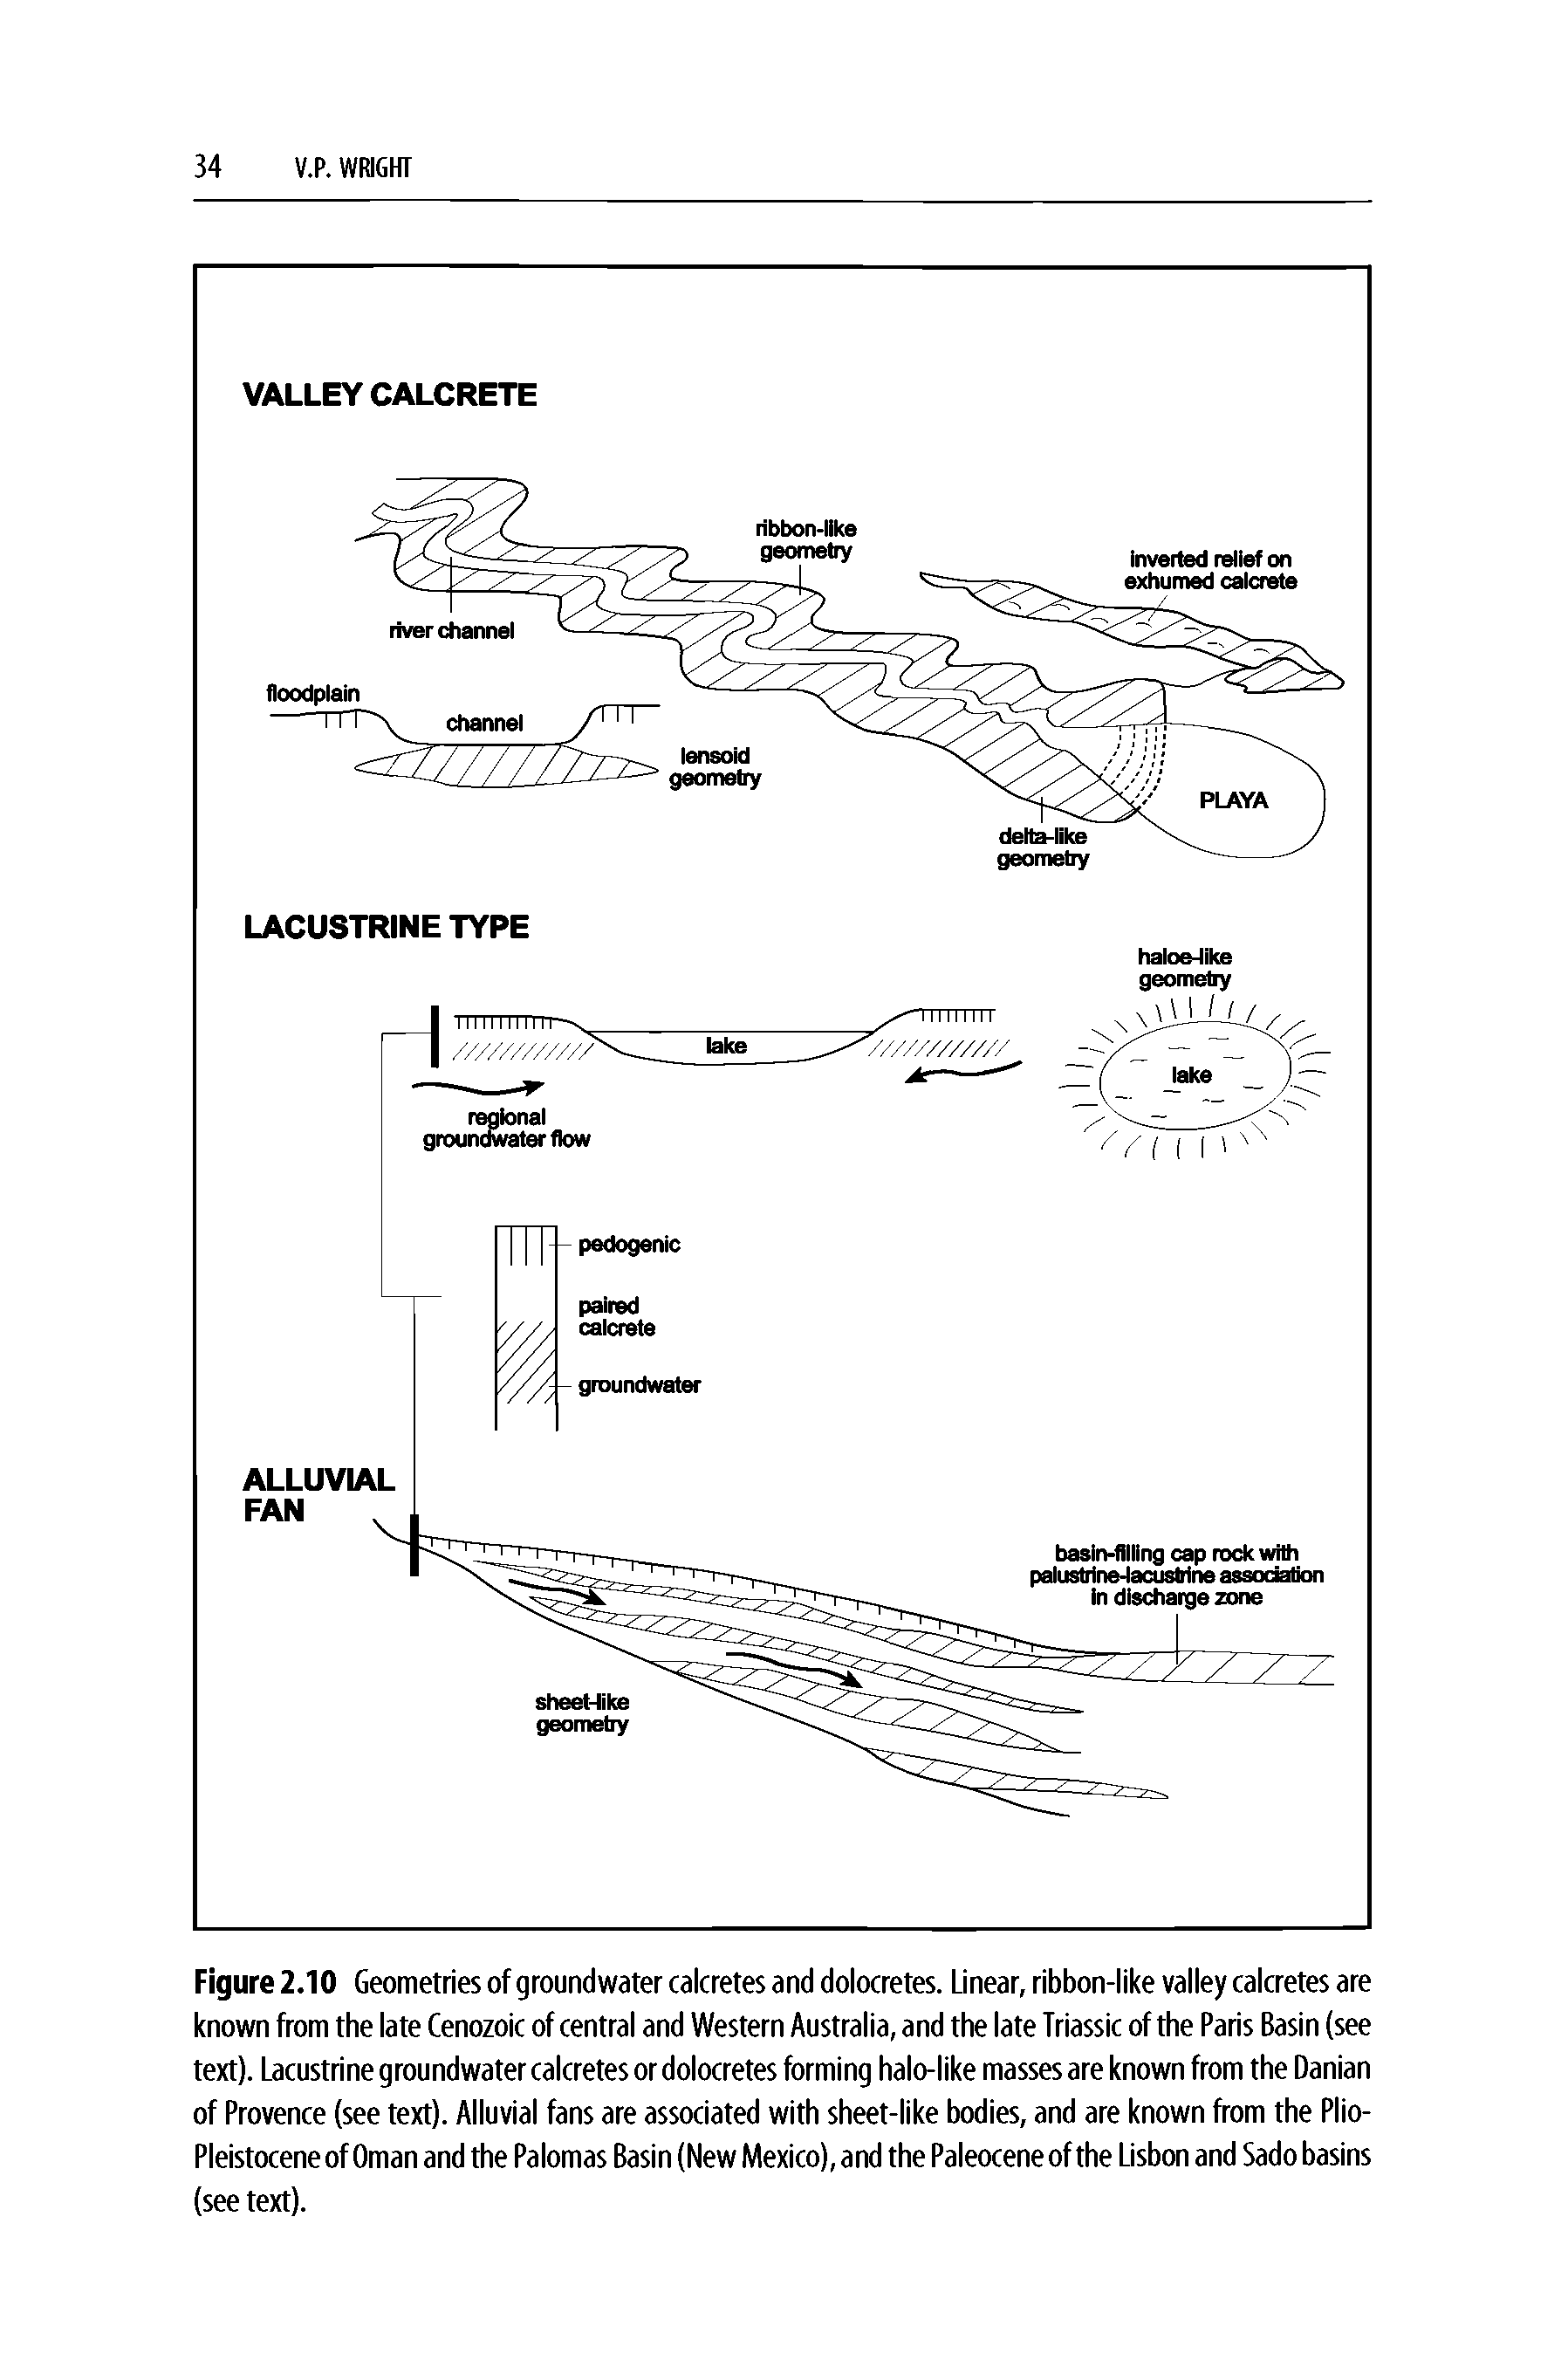 Figure 2.10 Geometries of groundwater calcretes and dolocretes. Linear, ribbon-like valley calcretes are known from the late Cenozoic of central and Western Australia, and the late Triassic of the Paris Basin (see text). Lacustrine groundwater calcretes or dolocretes forming halo-like masses are known from the Danian of Provence (see text). Alluvial fans are associated with sheet-like bodies, and are known from the Plio-Pleistocene of Oman and the Palomas Basin (New Mexico), and the Paleocene of the Lisbon and Sado basins (see text).